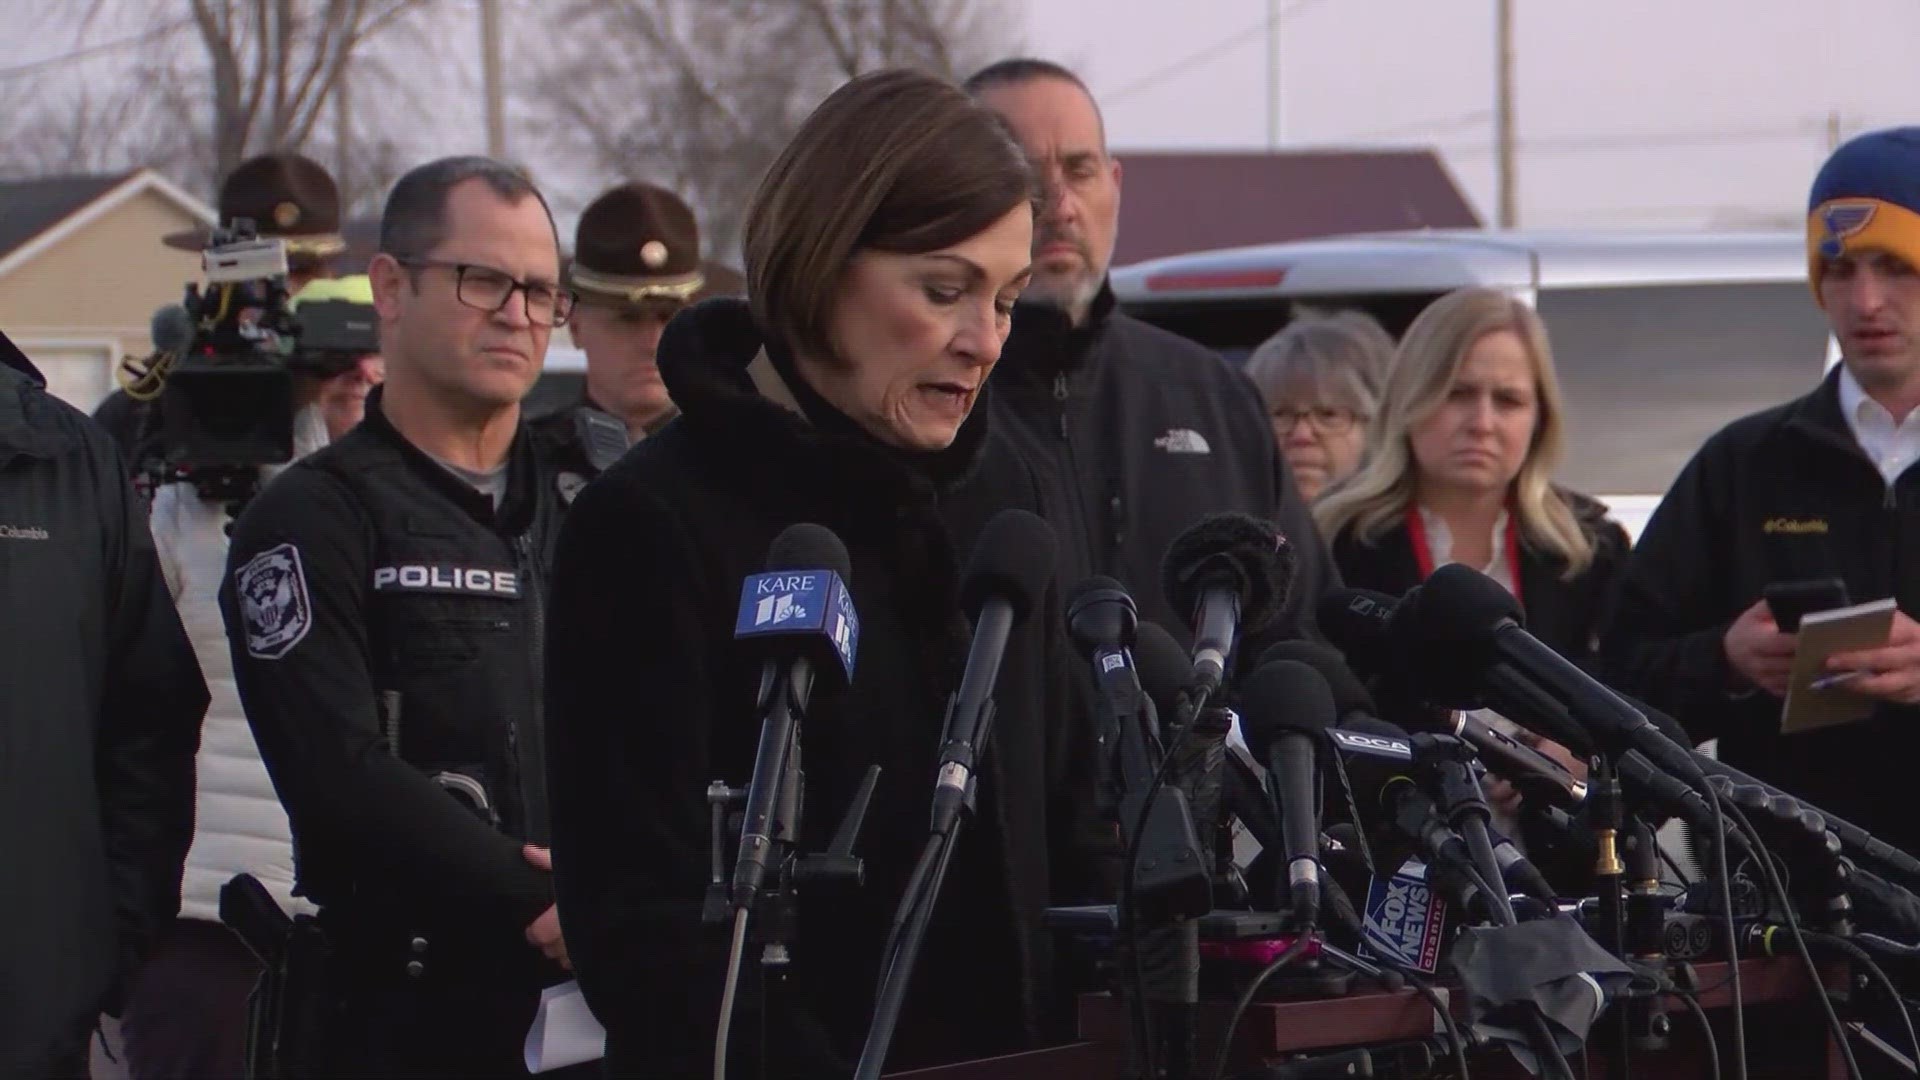 In the press conference, police and Iowa DCI confirmed the identity of the shooter as 17-year-old Dylan Butler, who shot six people and himself.